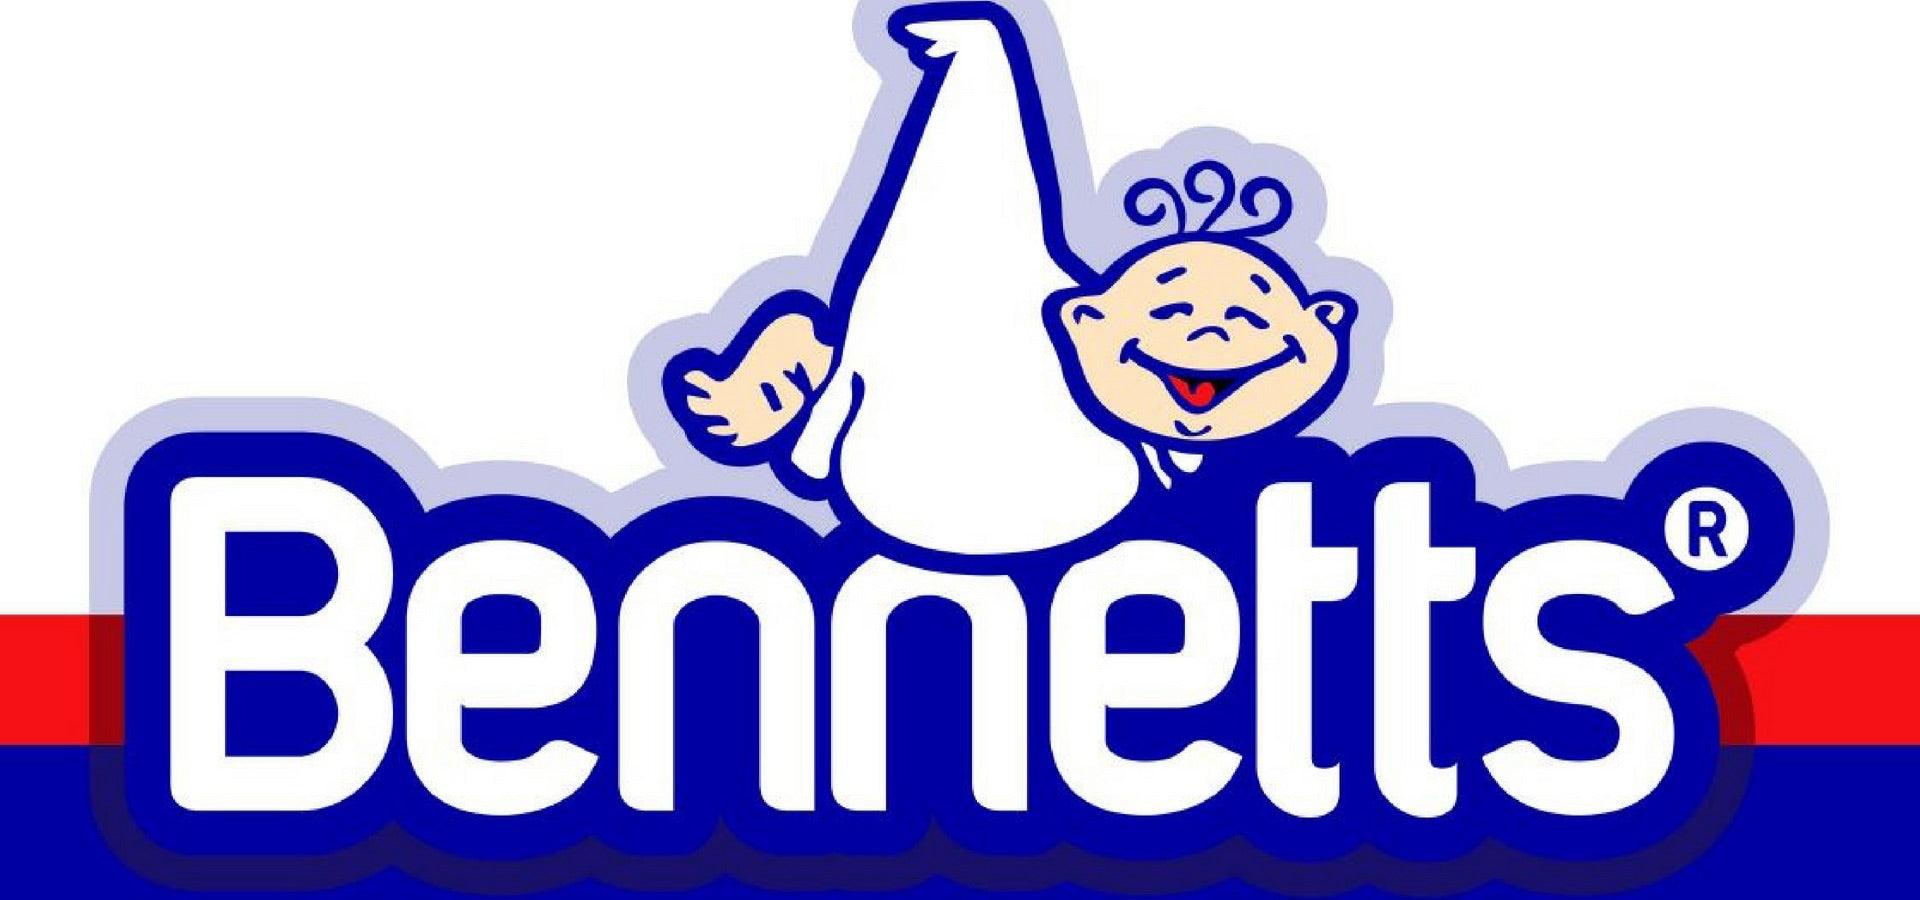 Celebrate with Bennetts for Babies: Enter to Win a Valuable Hamper! - 4aKid